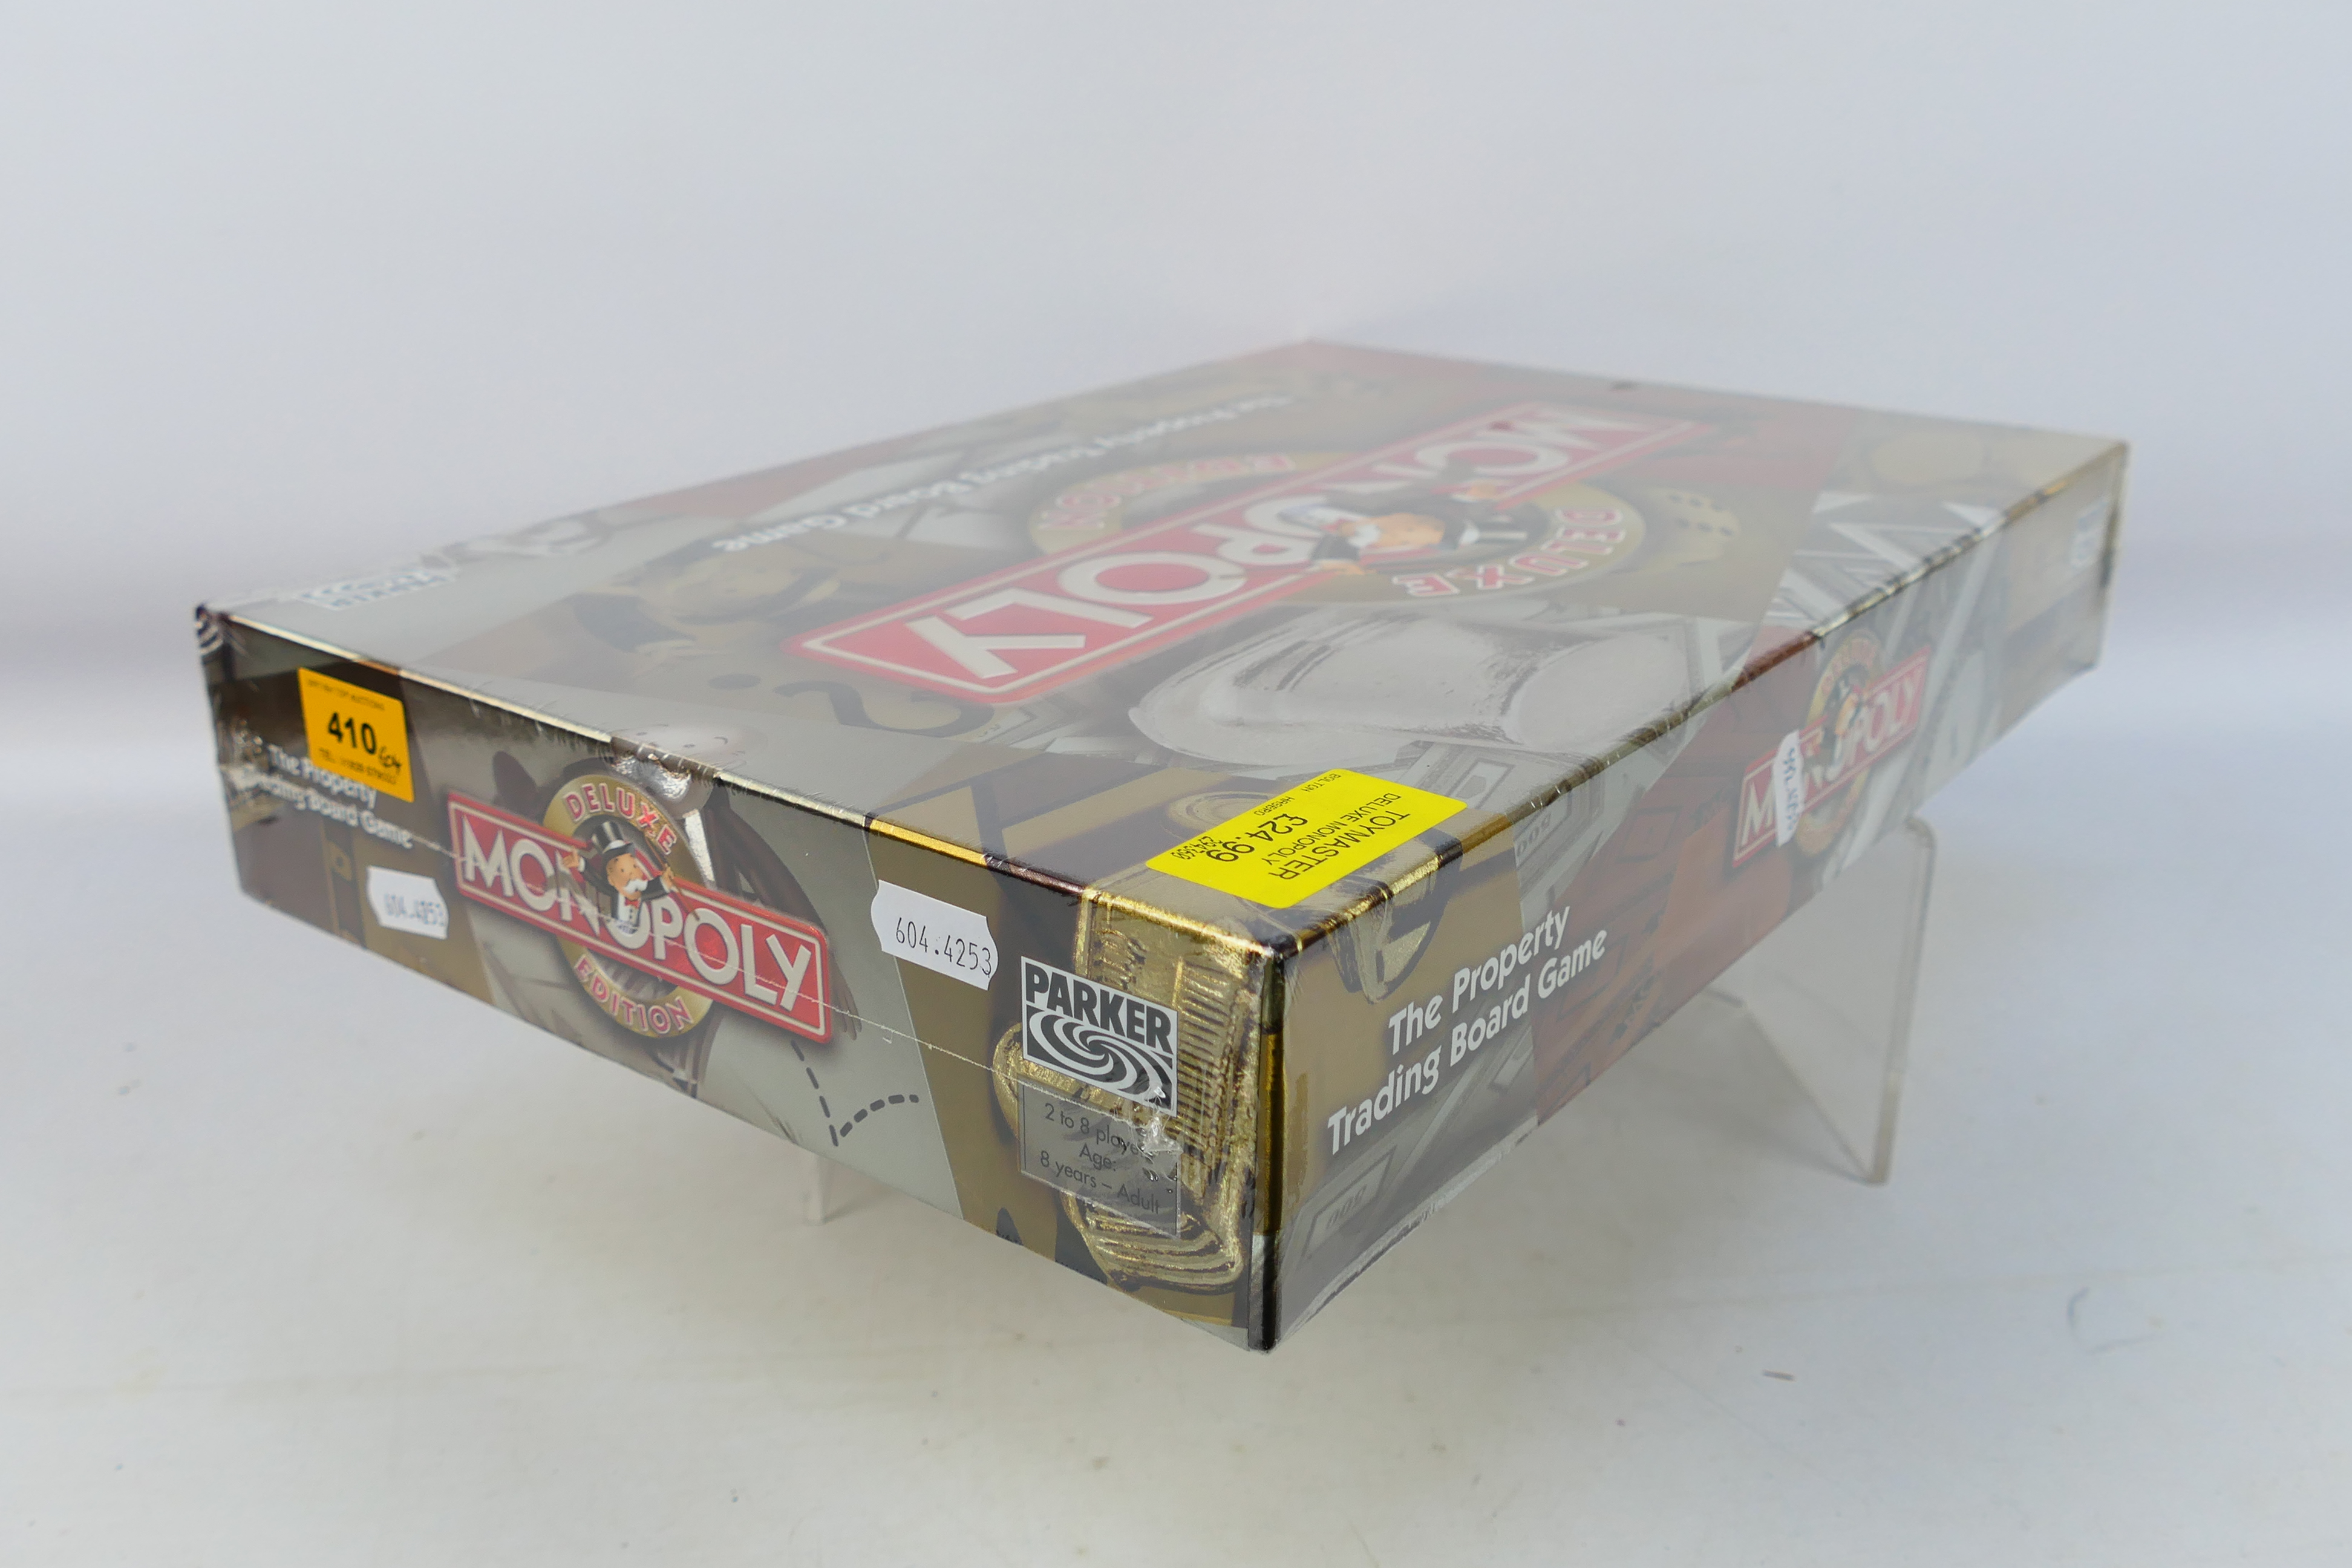 Hasbro - Parker - Monopoly - An unopened - Image 3 of 3